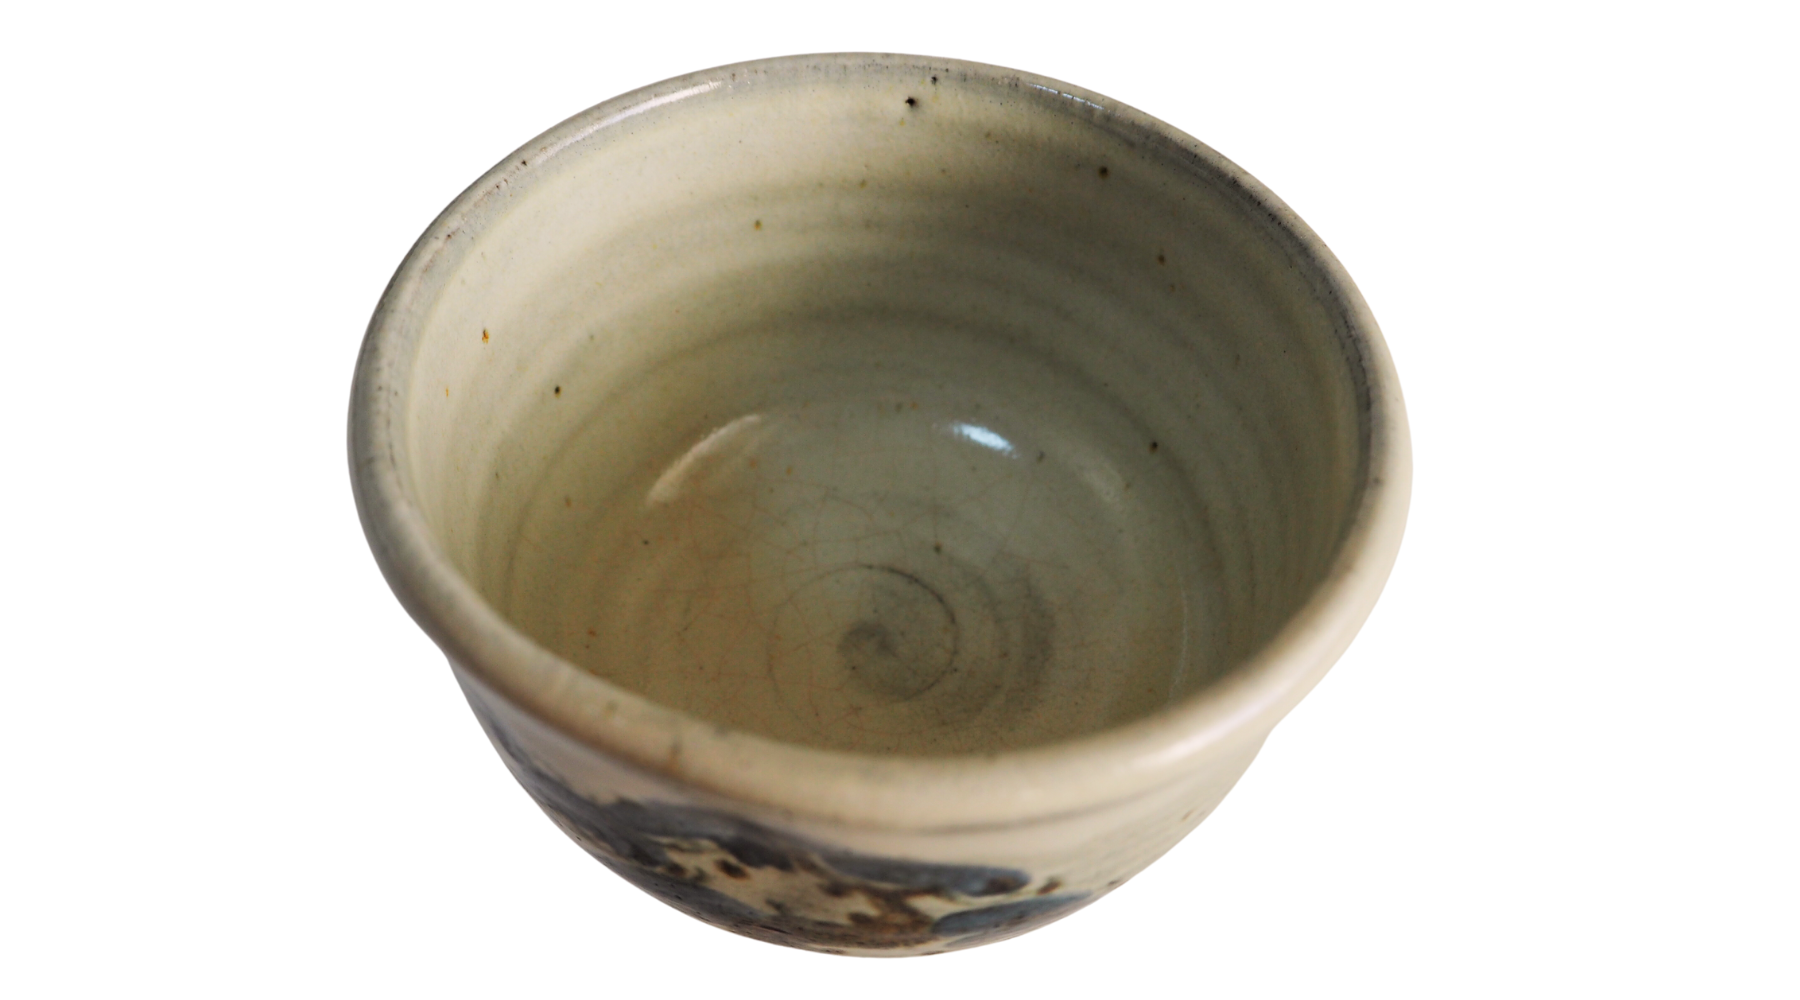 Traditional chawan crafted in Japan.